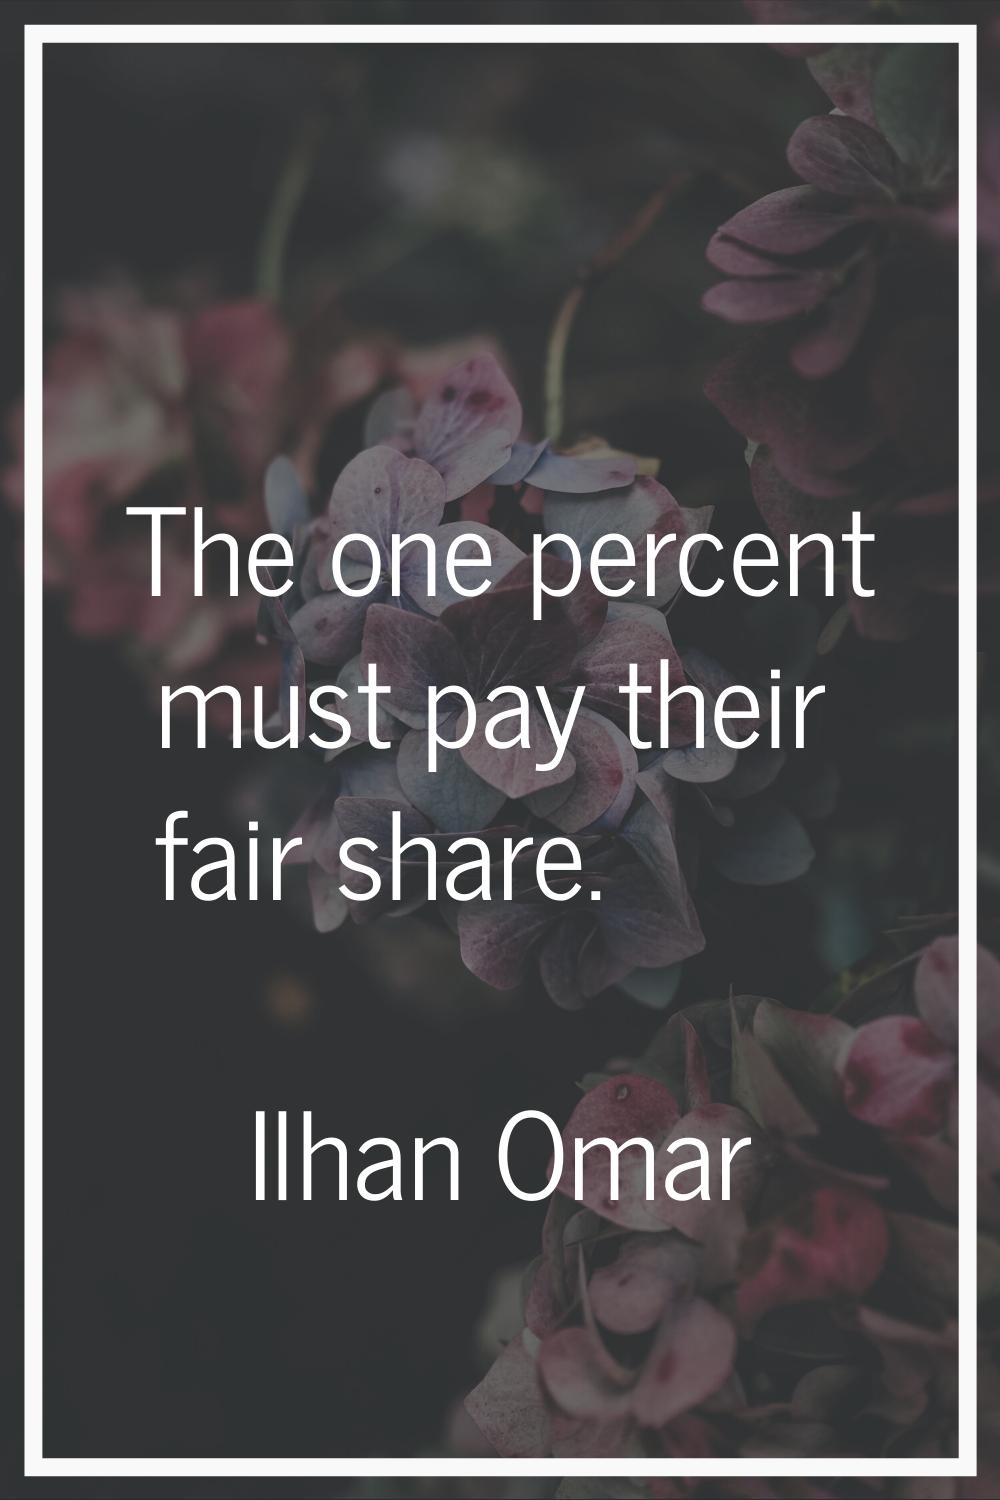 The one percent must pay their fair share.